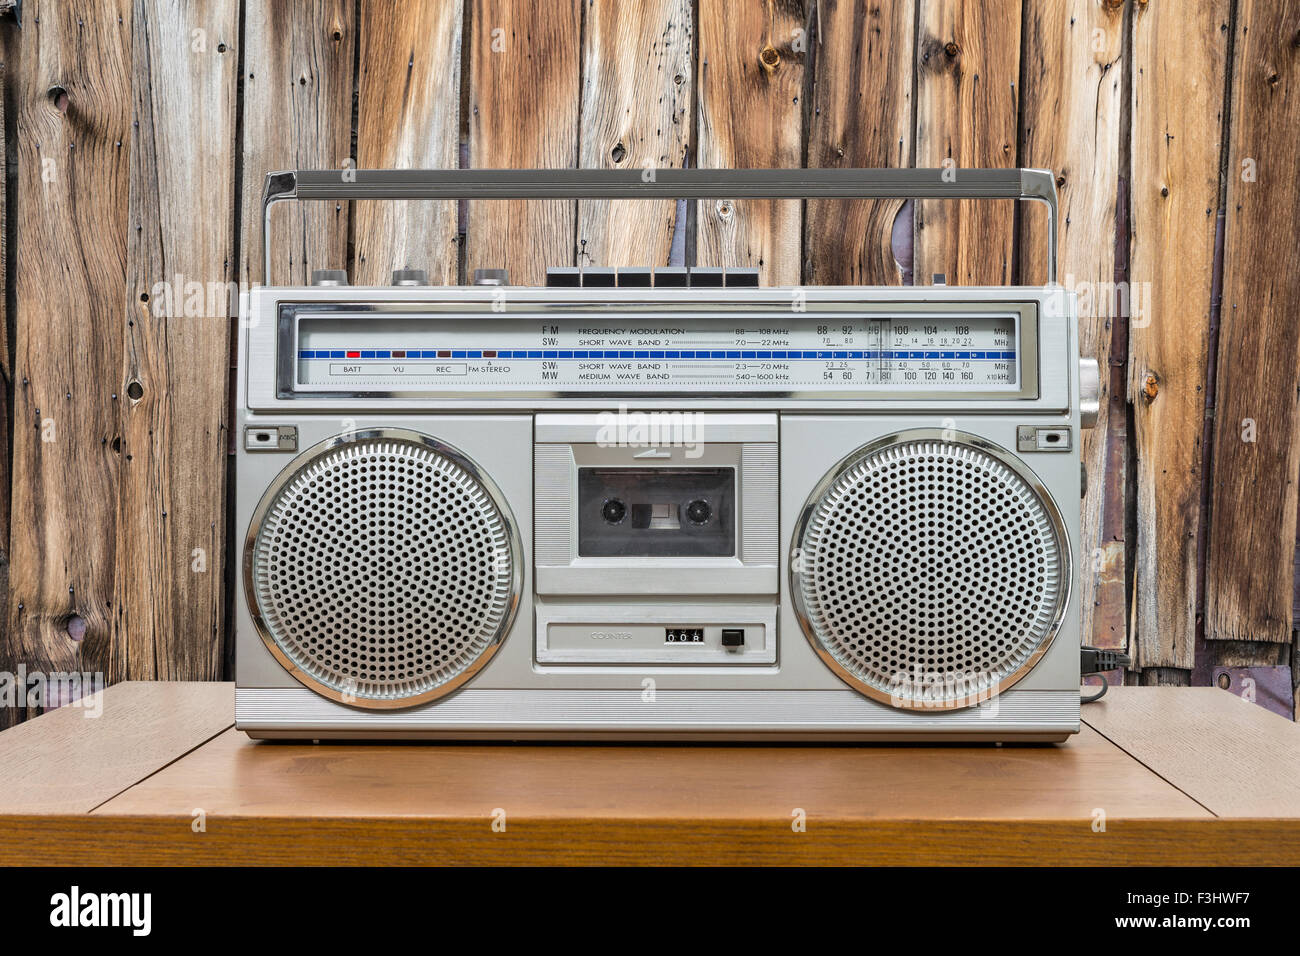 Vintage boombox on wood table with rustic cabin wood wall. Stock Photo